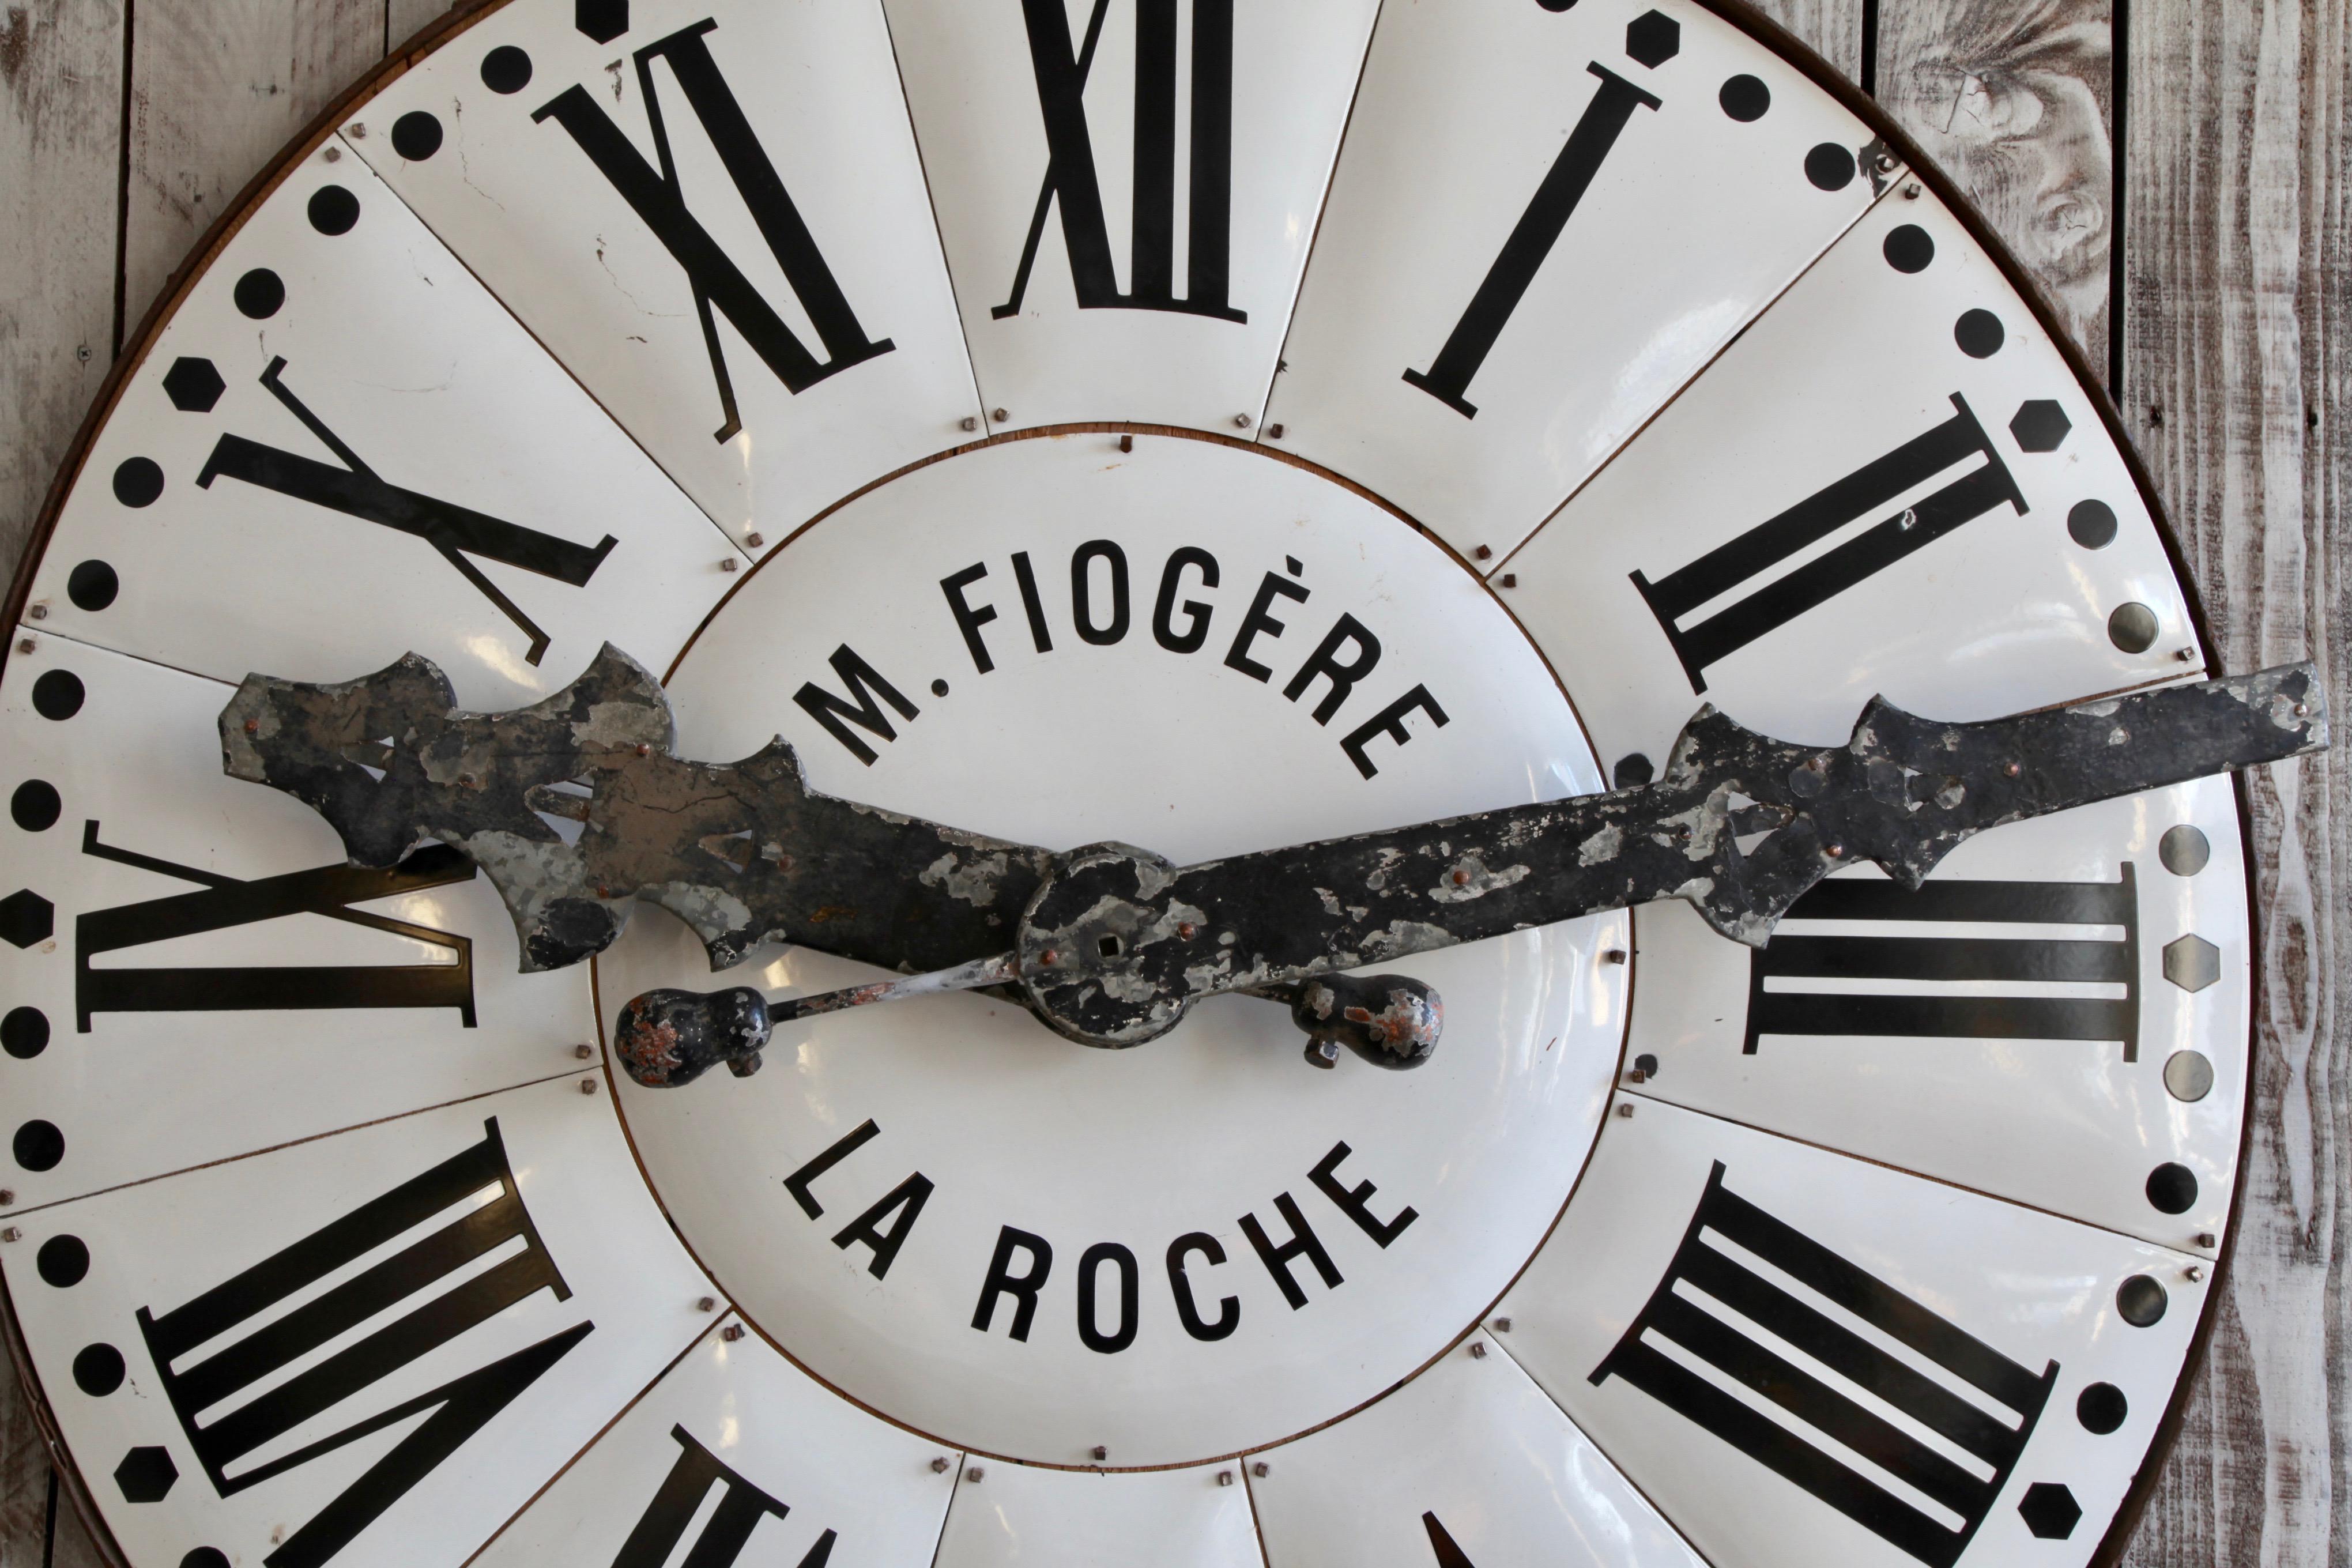 Large French Turn of the Century White Enamelled Clock Face from La Roche In Good Condition For Sale In London, Park Royal